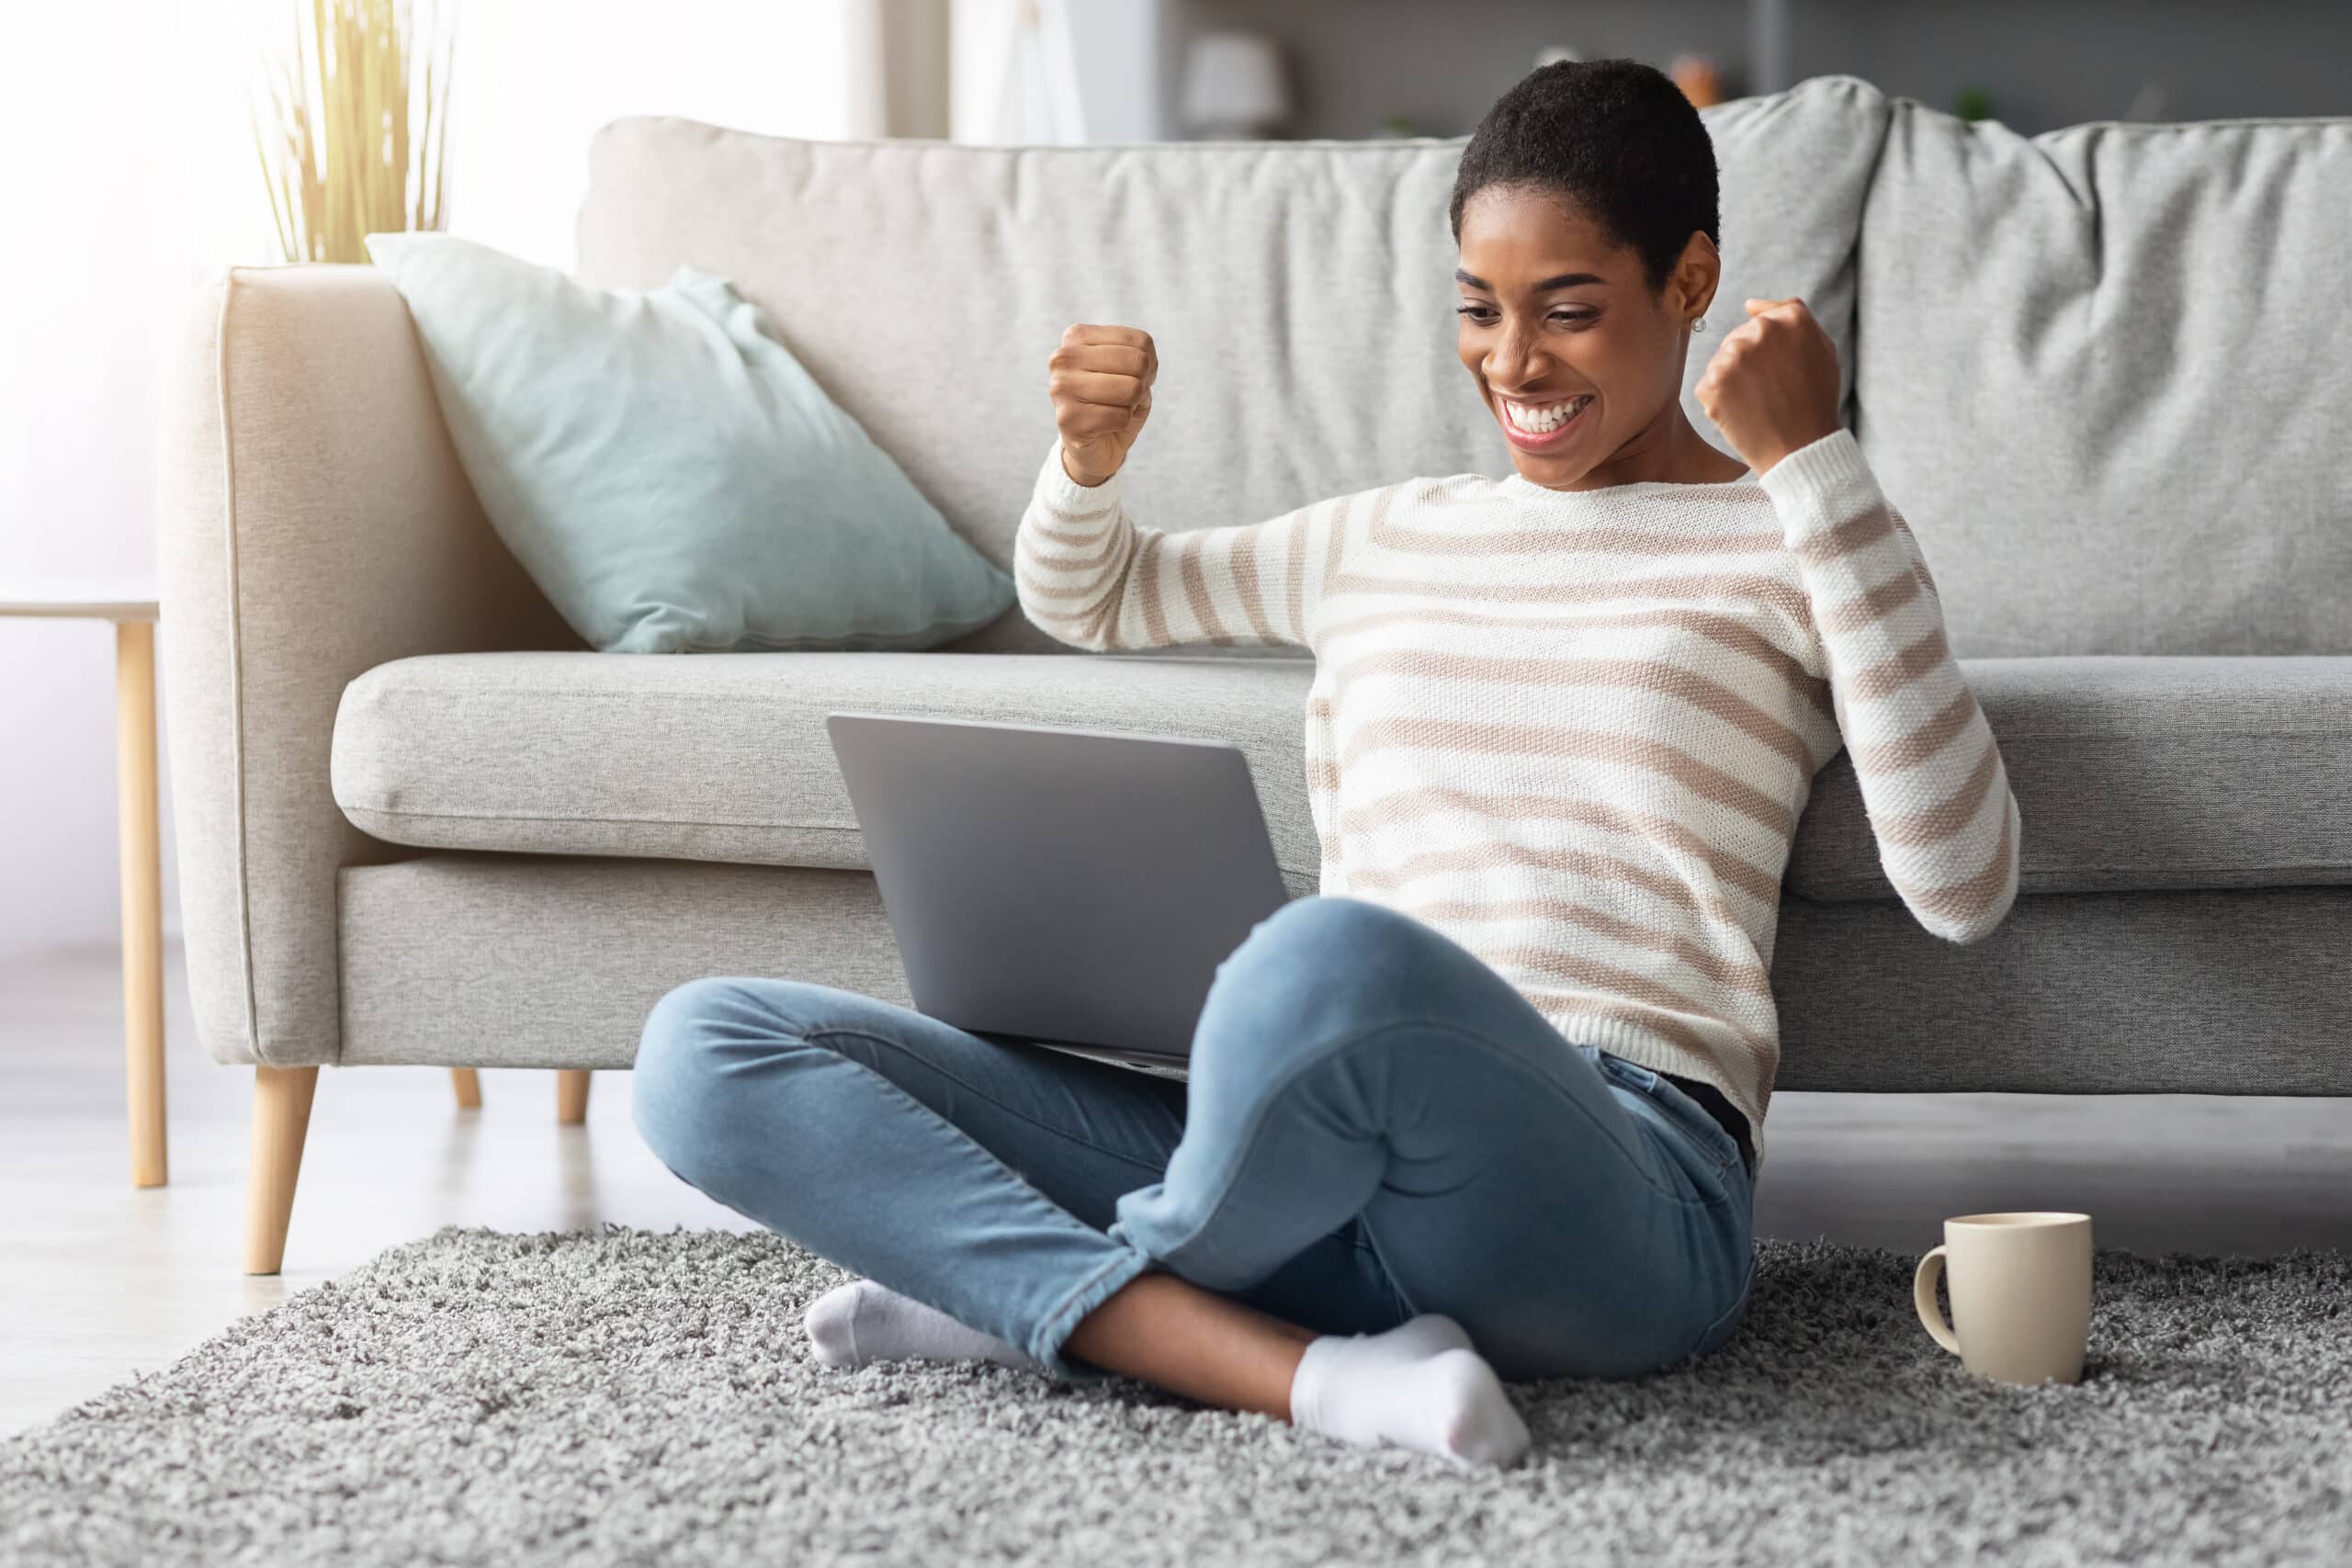 Online Profit. Joyful Happy African-American Woman Celebrating Success With Laptop At Home